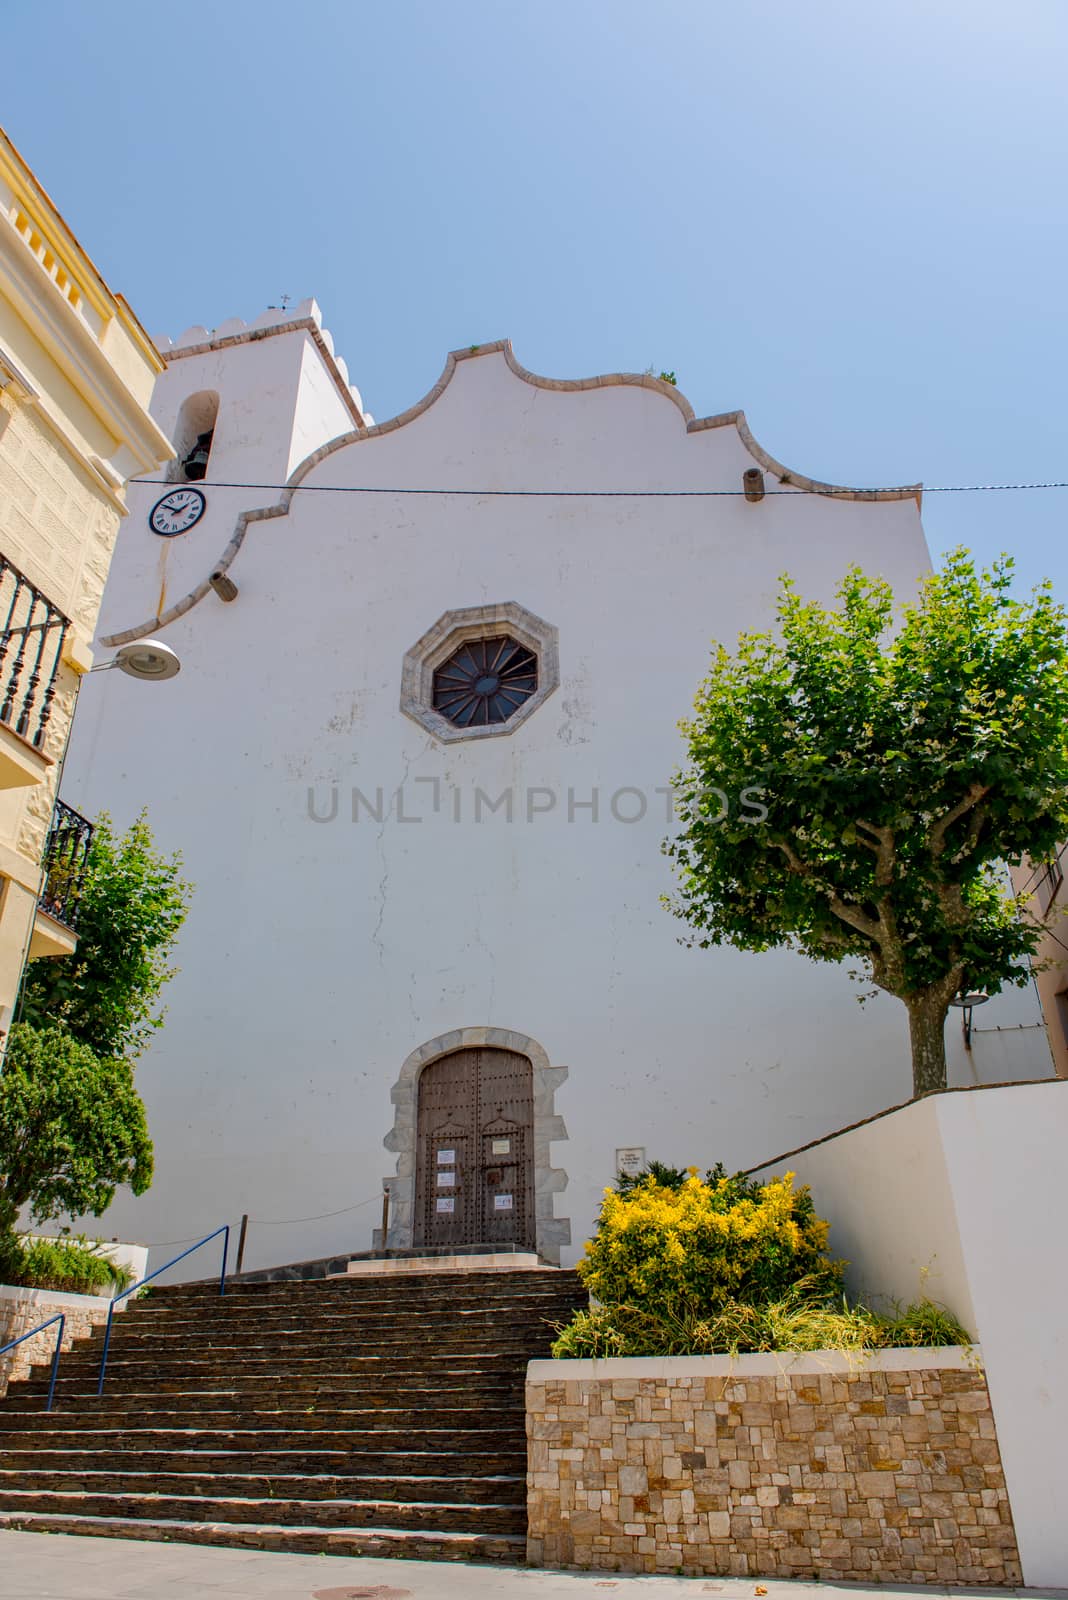  View of The church is dedicated to Santa Maria de les Neus in P by martinscphoto